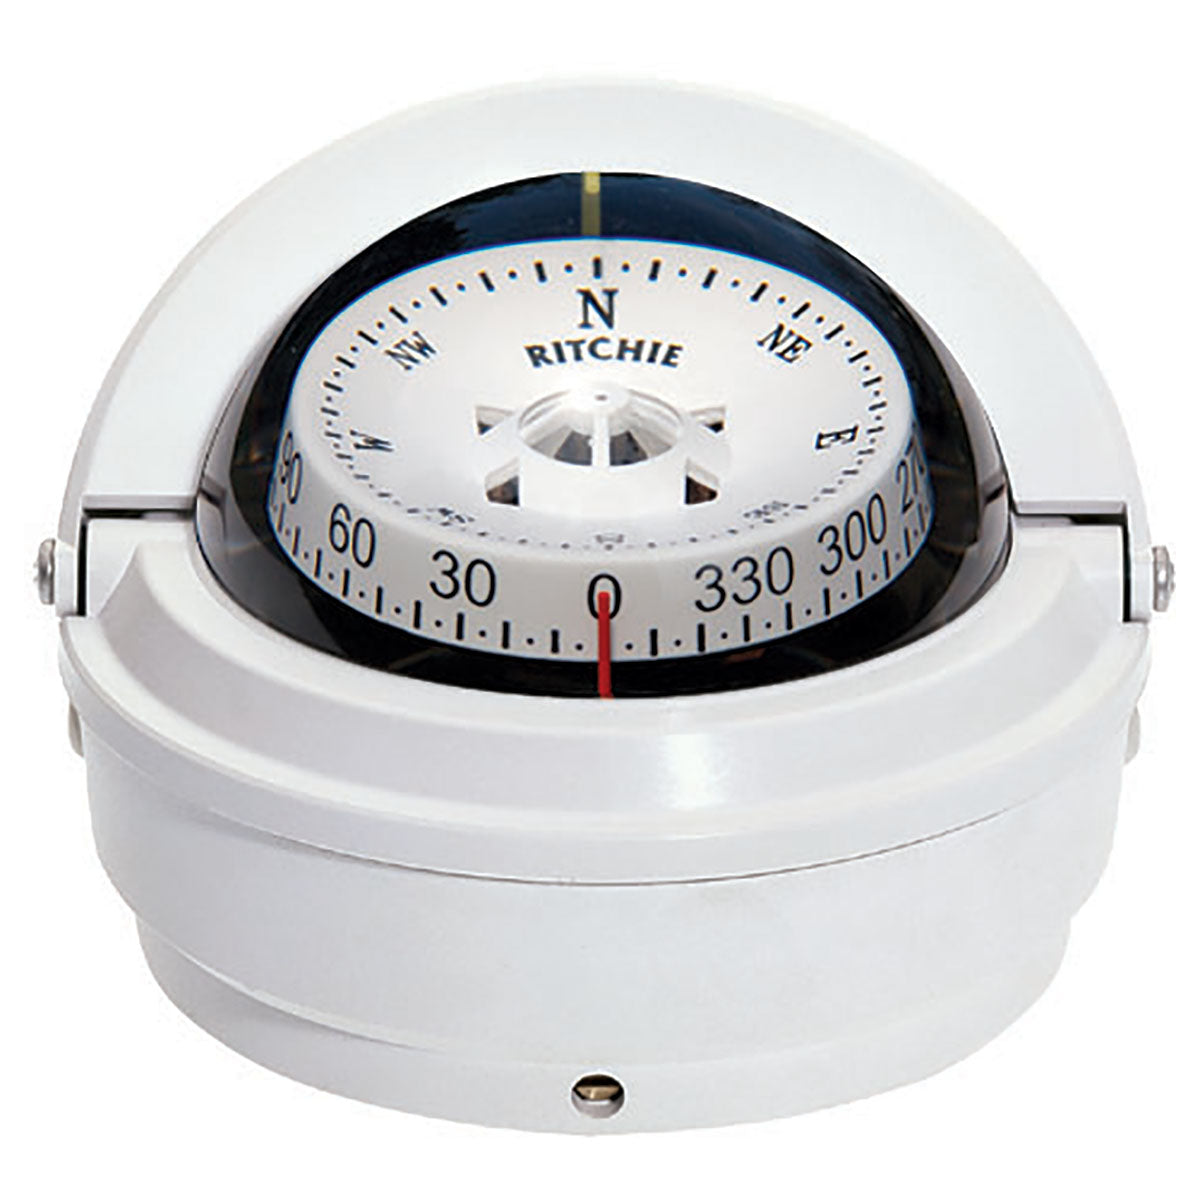 Ritchie S-87 Voyager Compass - Surface Mount